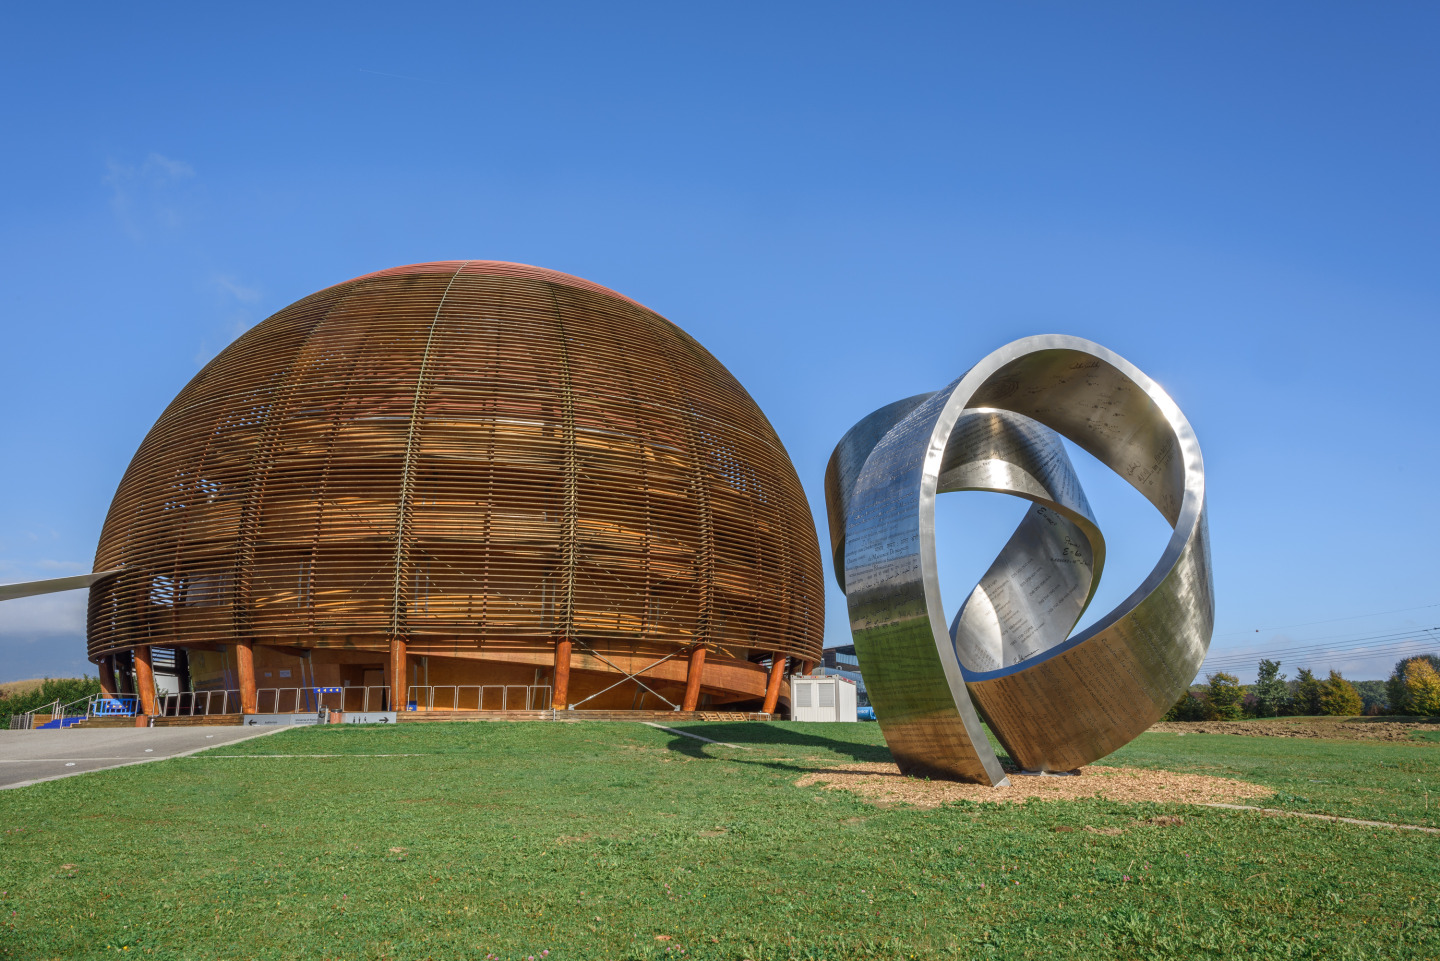 "Wandering the immeasurable" – a 15-tonne sculpture next to the Globe of Science and Innovation (Image: CERN)